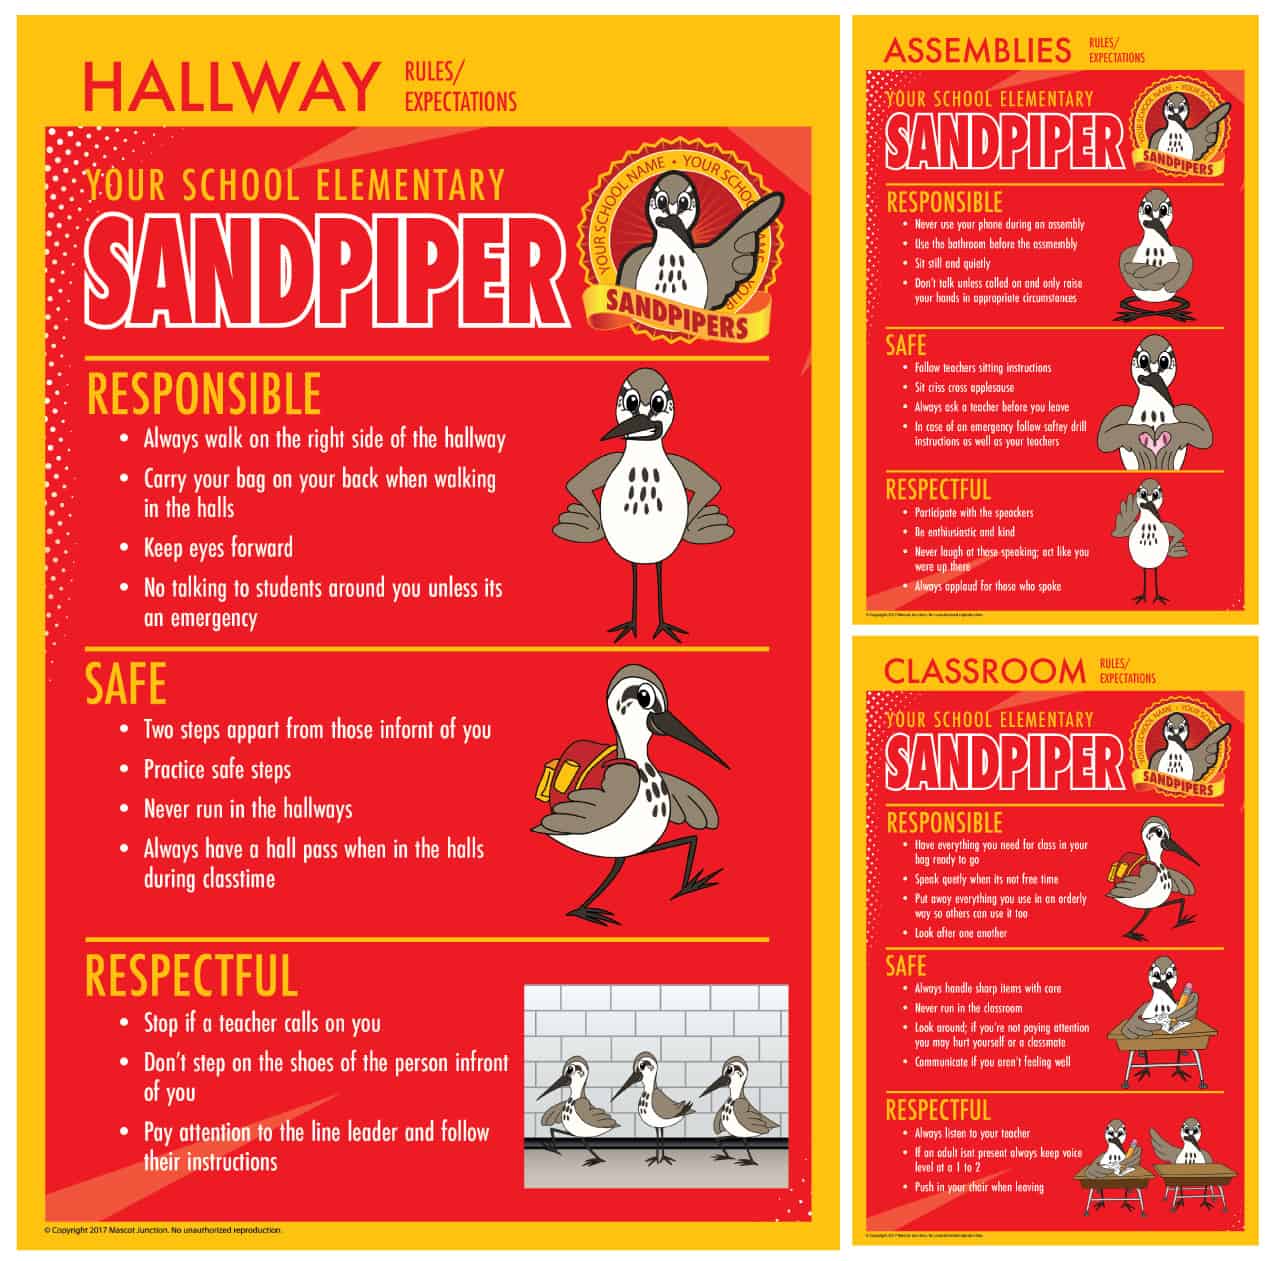 Rules-posters_SANDPIPER